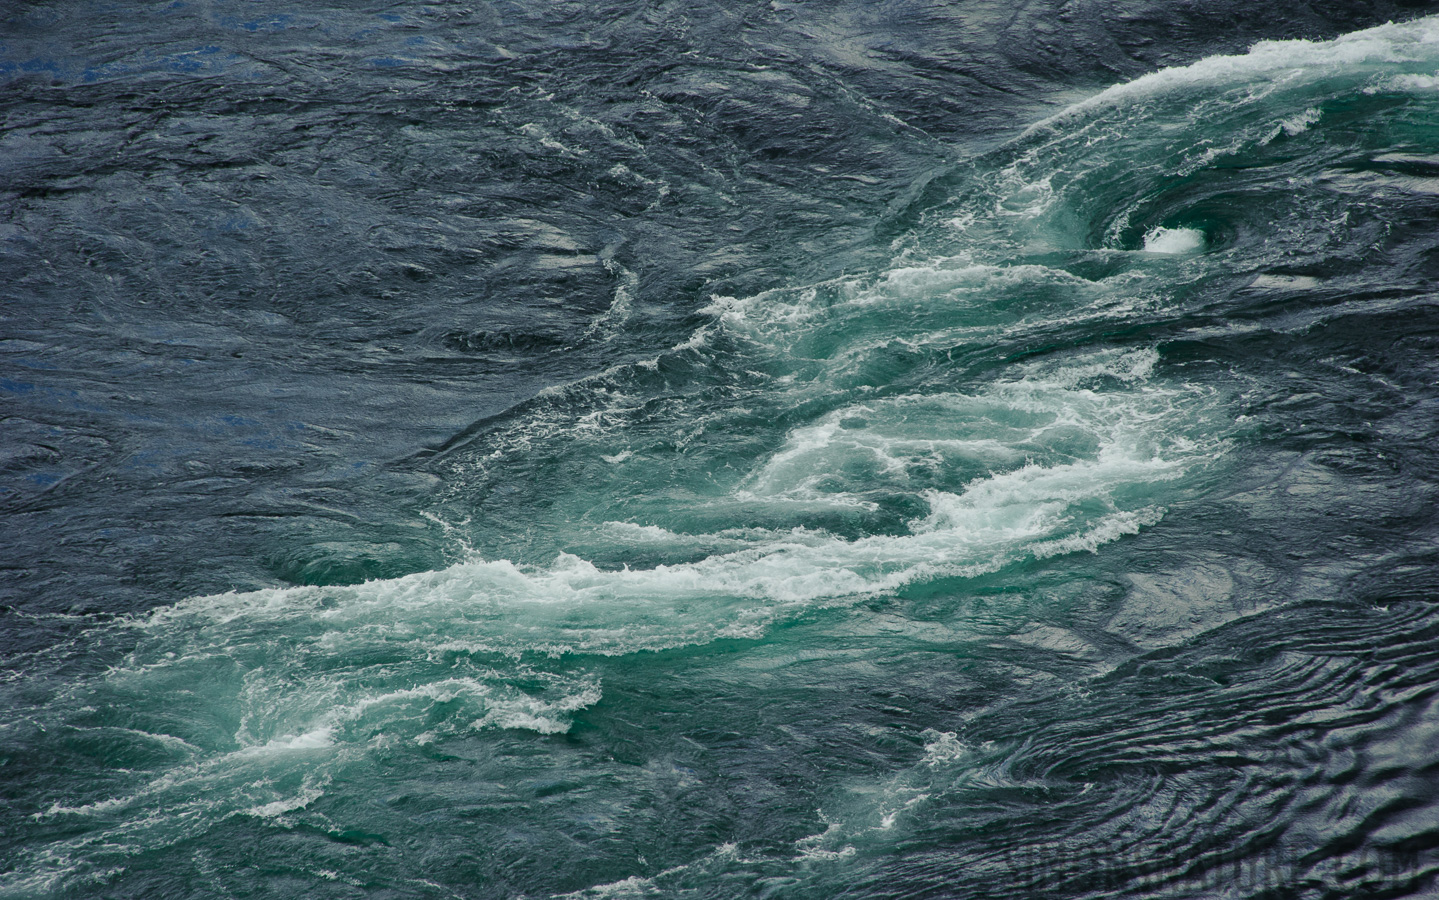 Strongest tidal currents in the world [300 mm, 1/800 sec at f / 8.0, ISO 400]